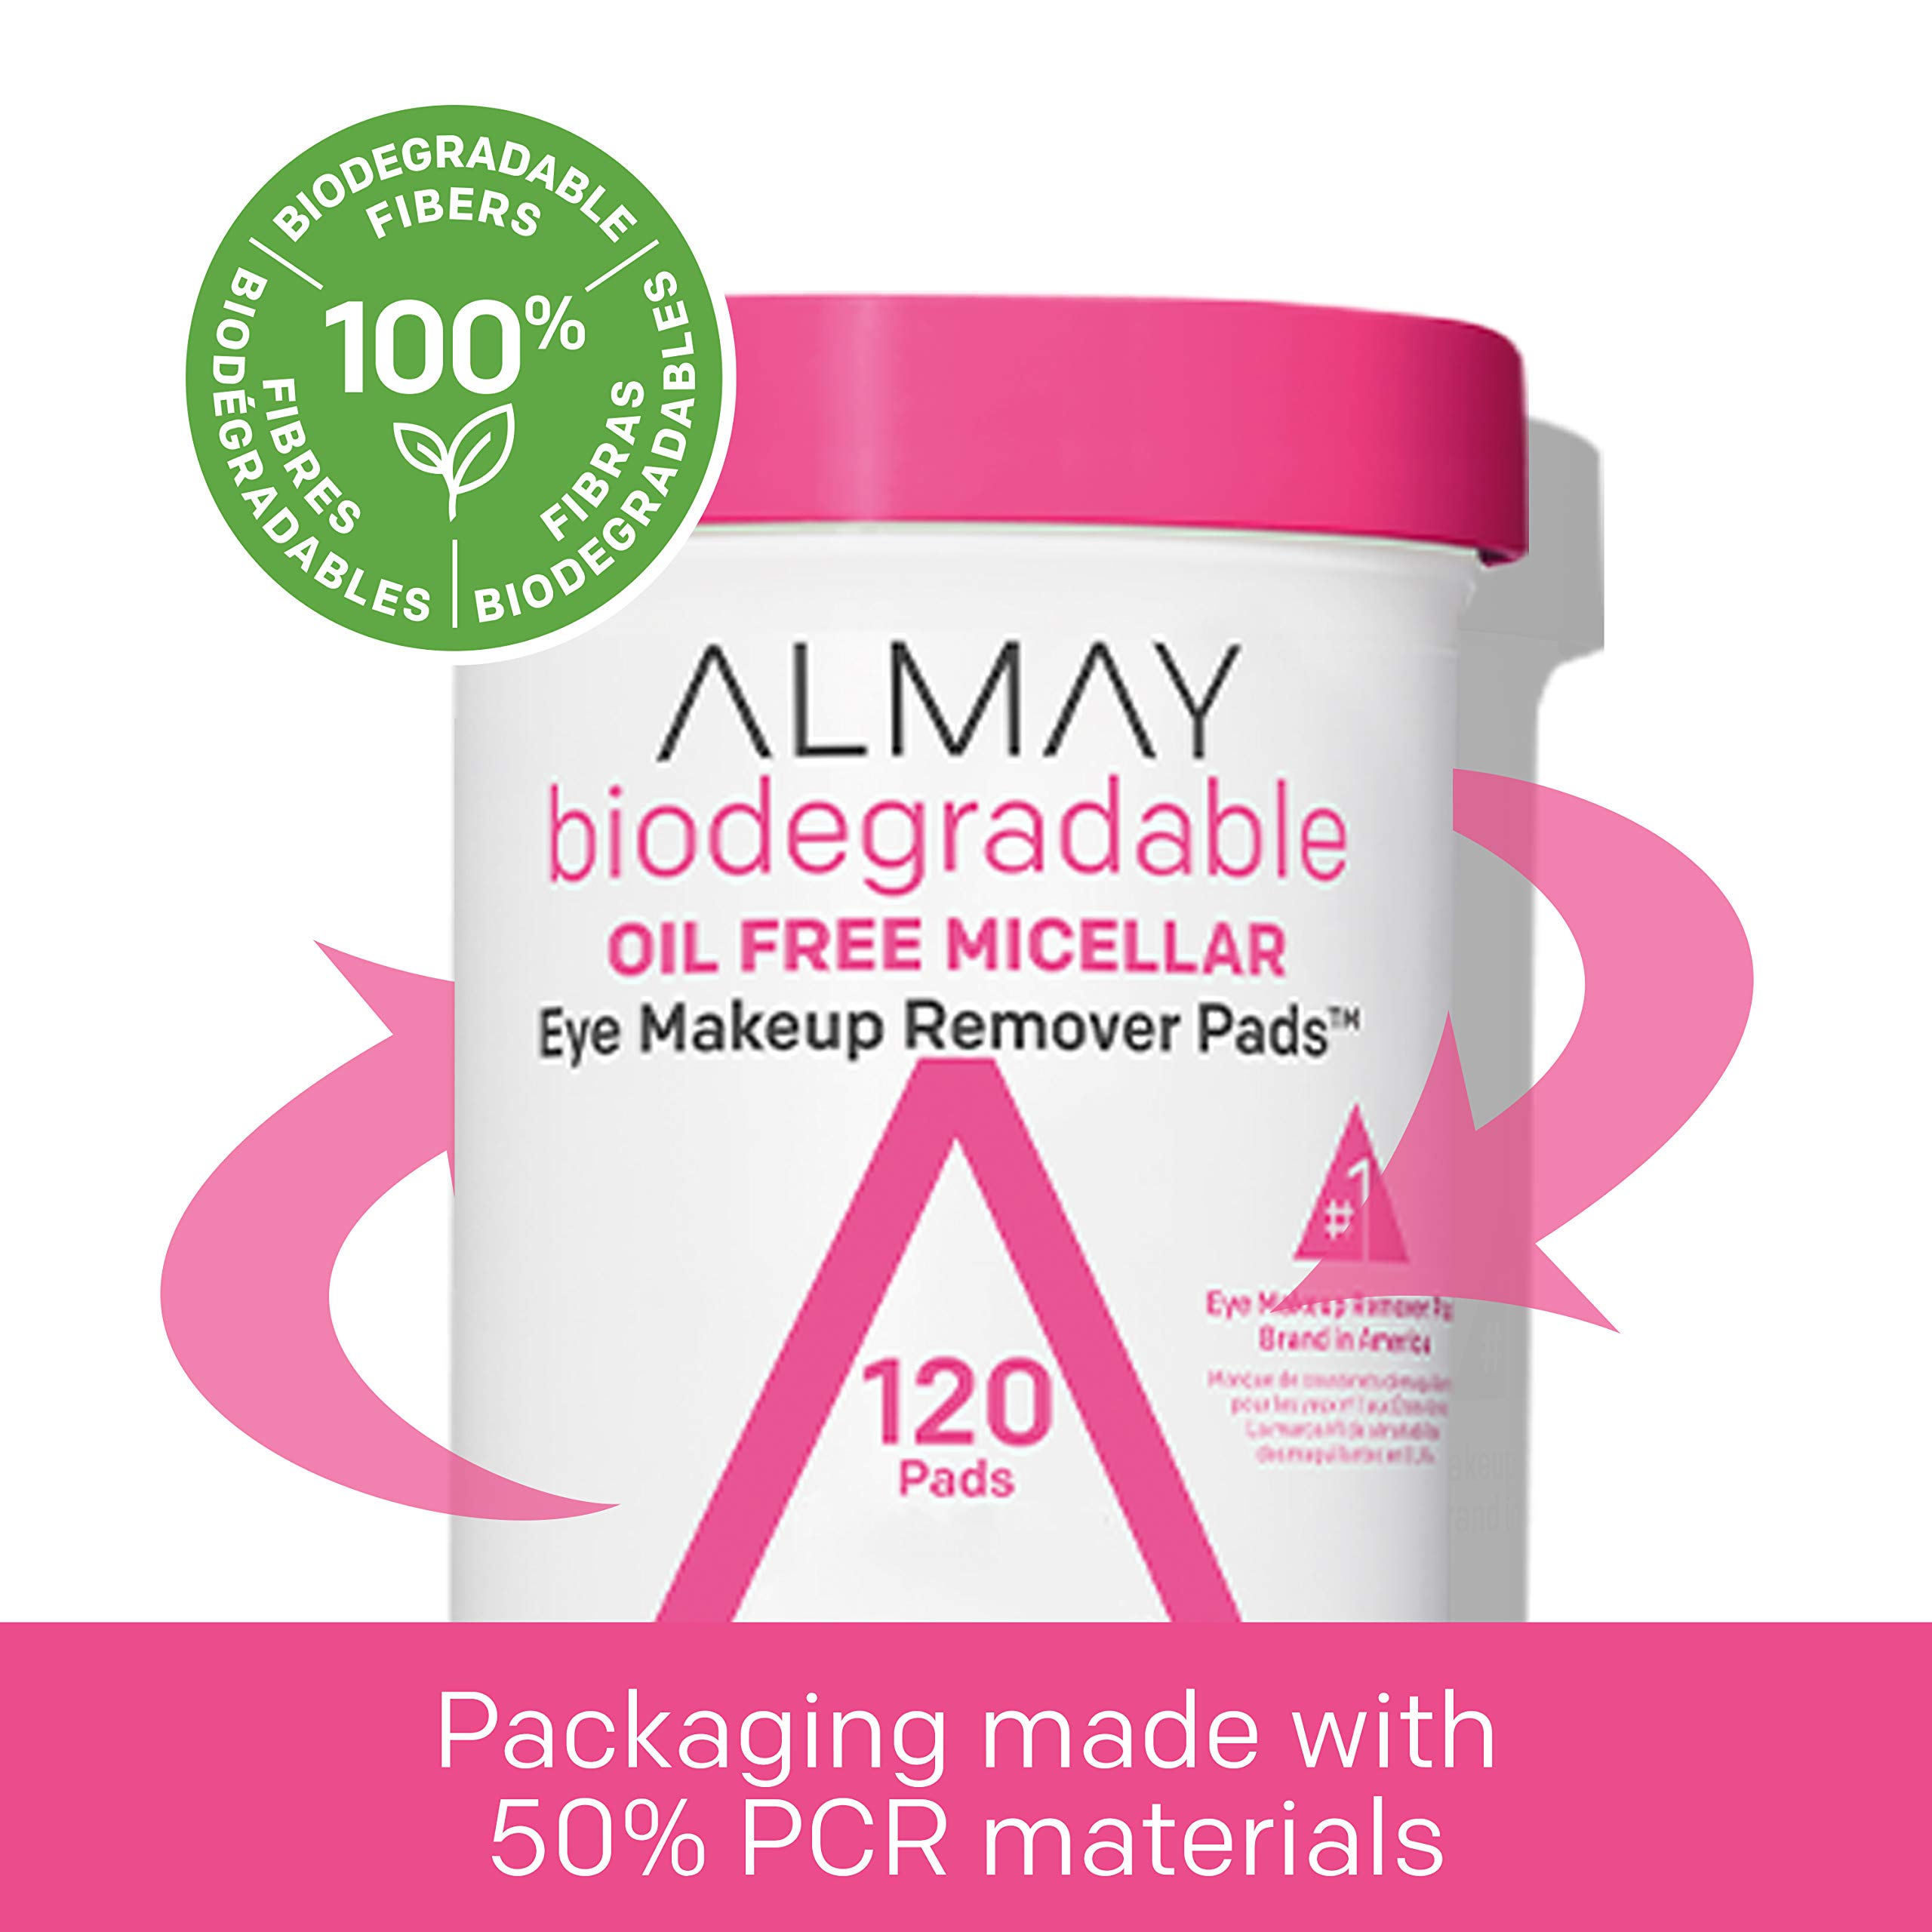 Almay Makeup Remover Pads, Micellar Gentle, Longwear & Waterproof, Hypoallergenic, Fragrance Free, Dermatologist & Ophthalmologist Tested, 120 Pads (Pack of 1)